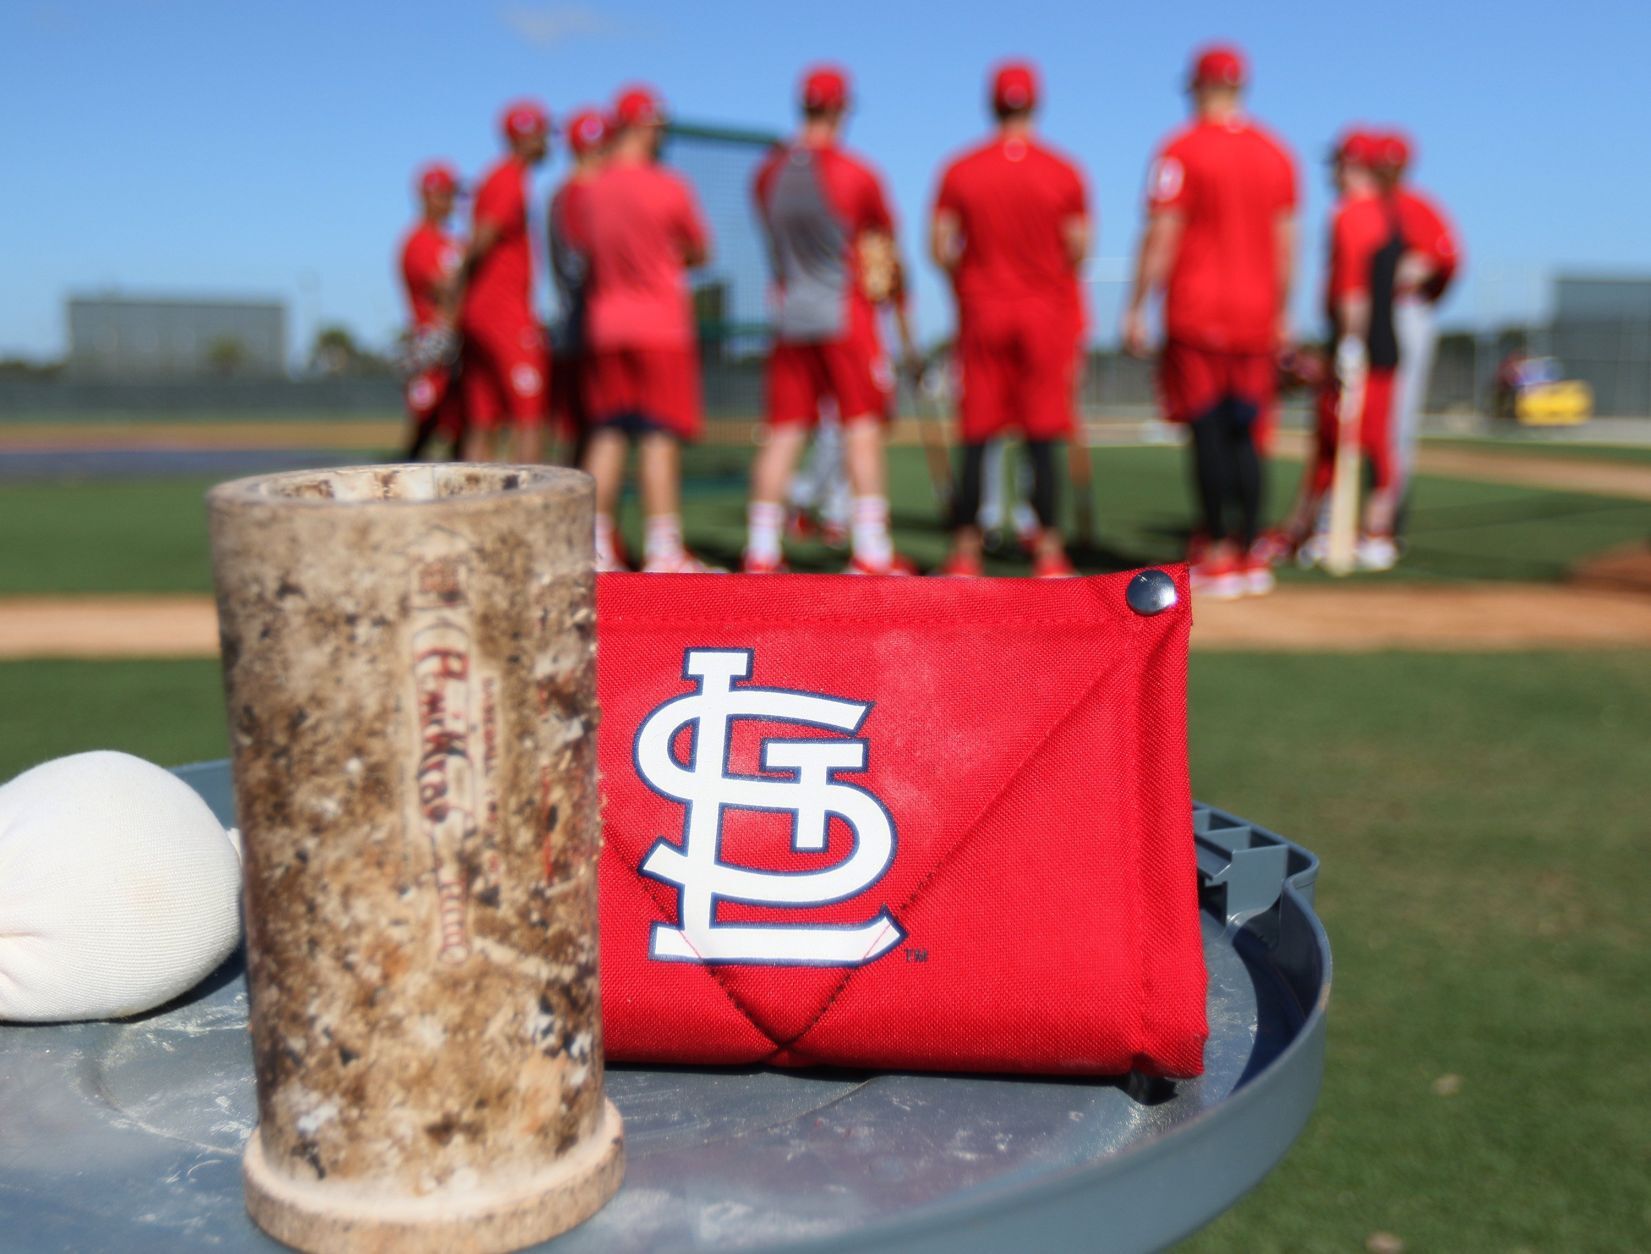 Cardinals set to sign two top 30 teenage talents as international amateur market opens